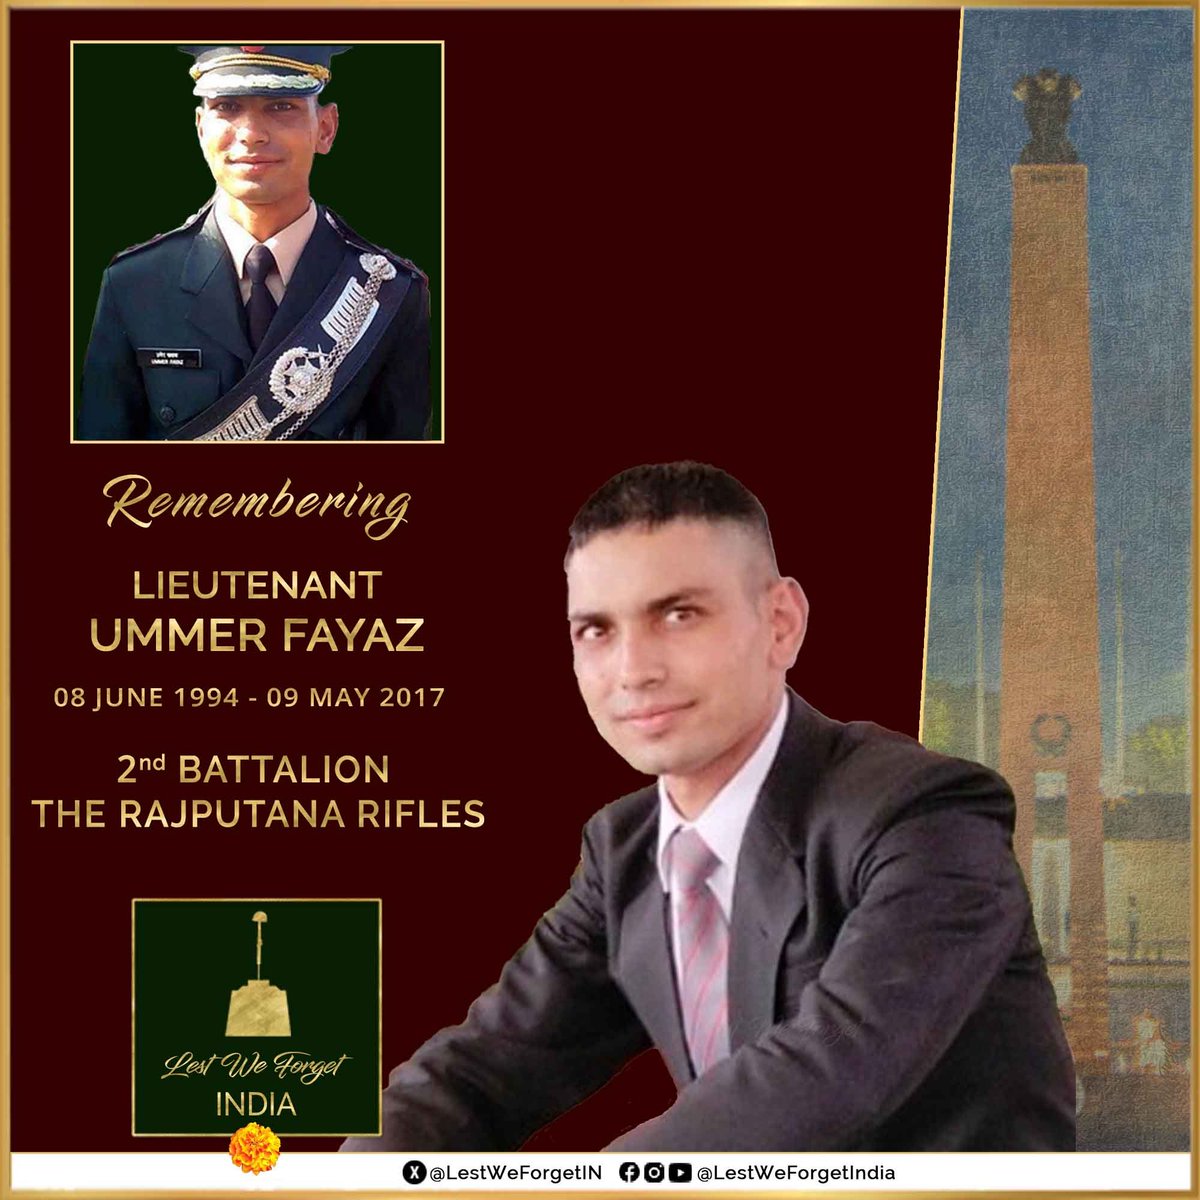 SEVEN years to date A young 23-year-old #IndianBrave snatched in the prime of his life & service #LestWeForgetIndia🇮🇳 The dastardly targeted attack on Lt Ummer Fayaz, 2 RAJ RIF, kidnapped and killed by terrorists in Shopian, J&K #OnThisDay 09 May in 2017 Gone, not forgotten🏵️